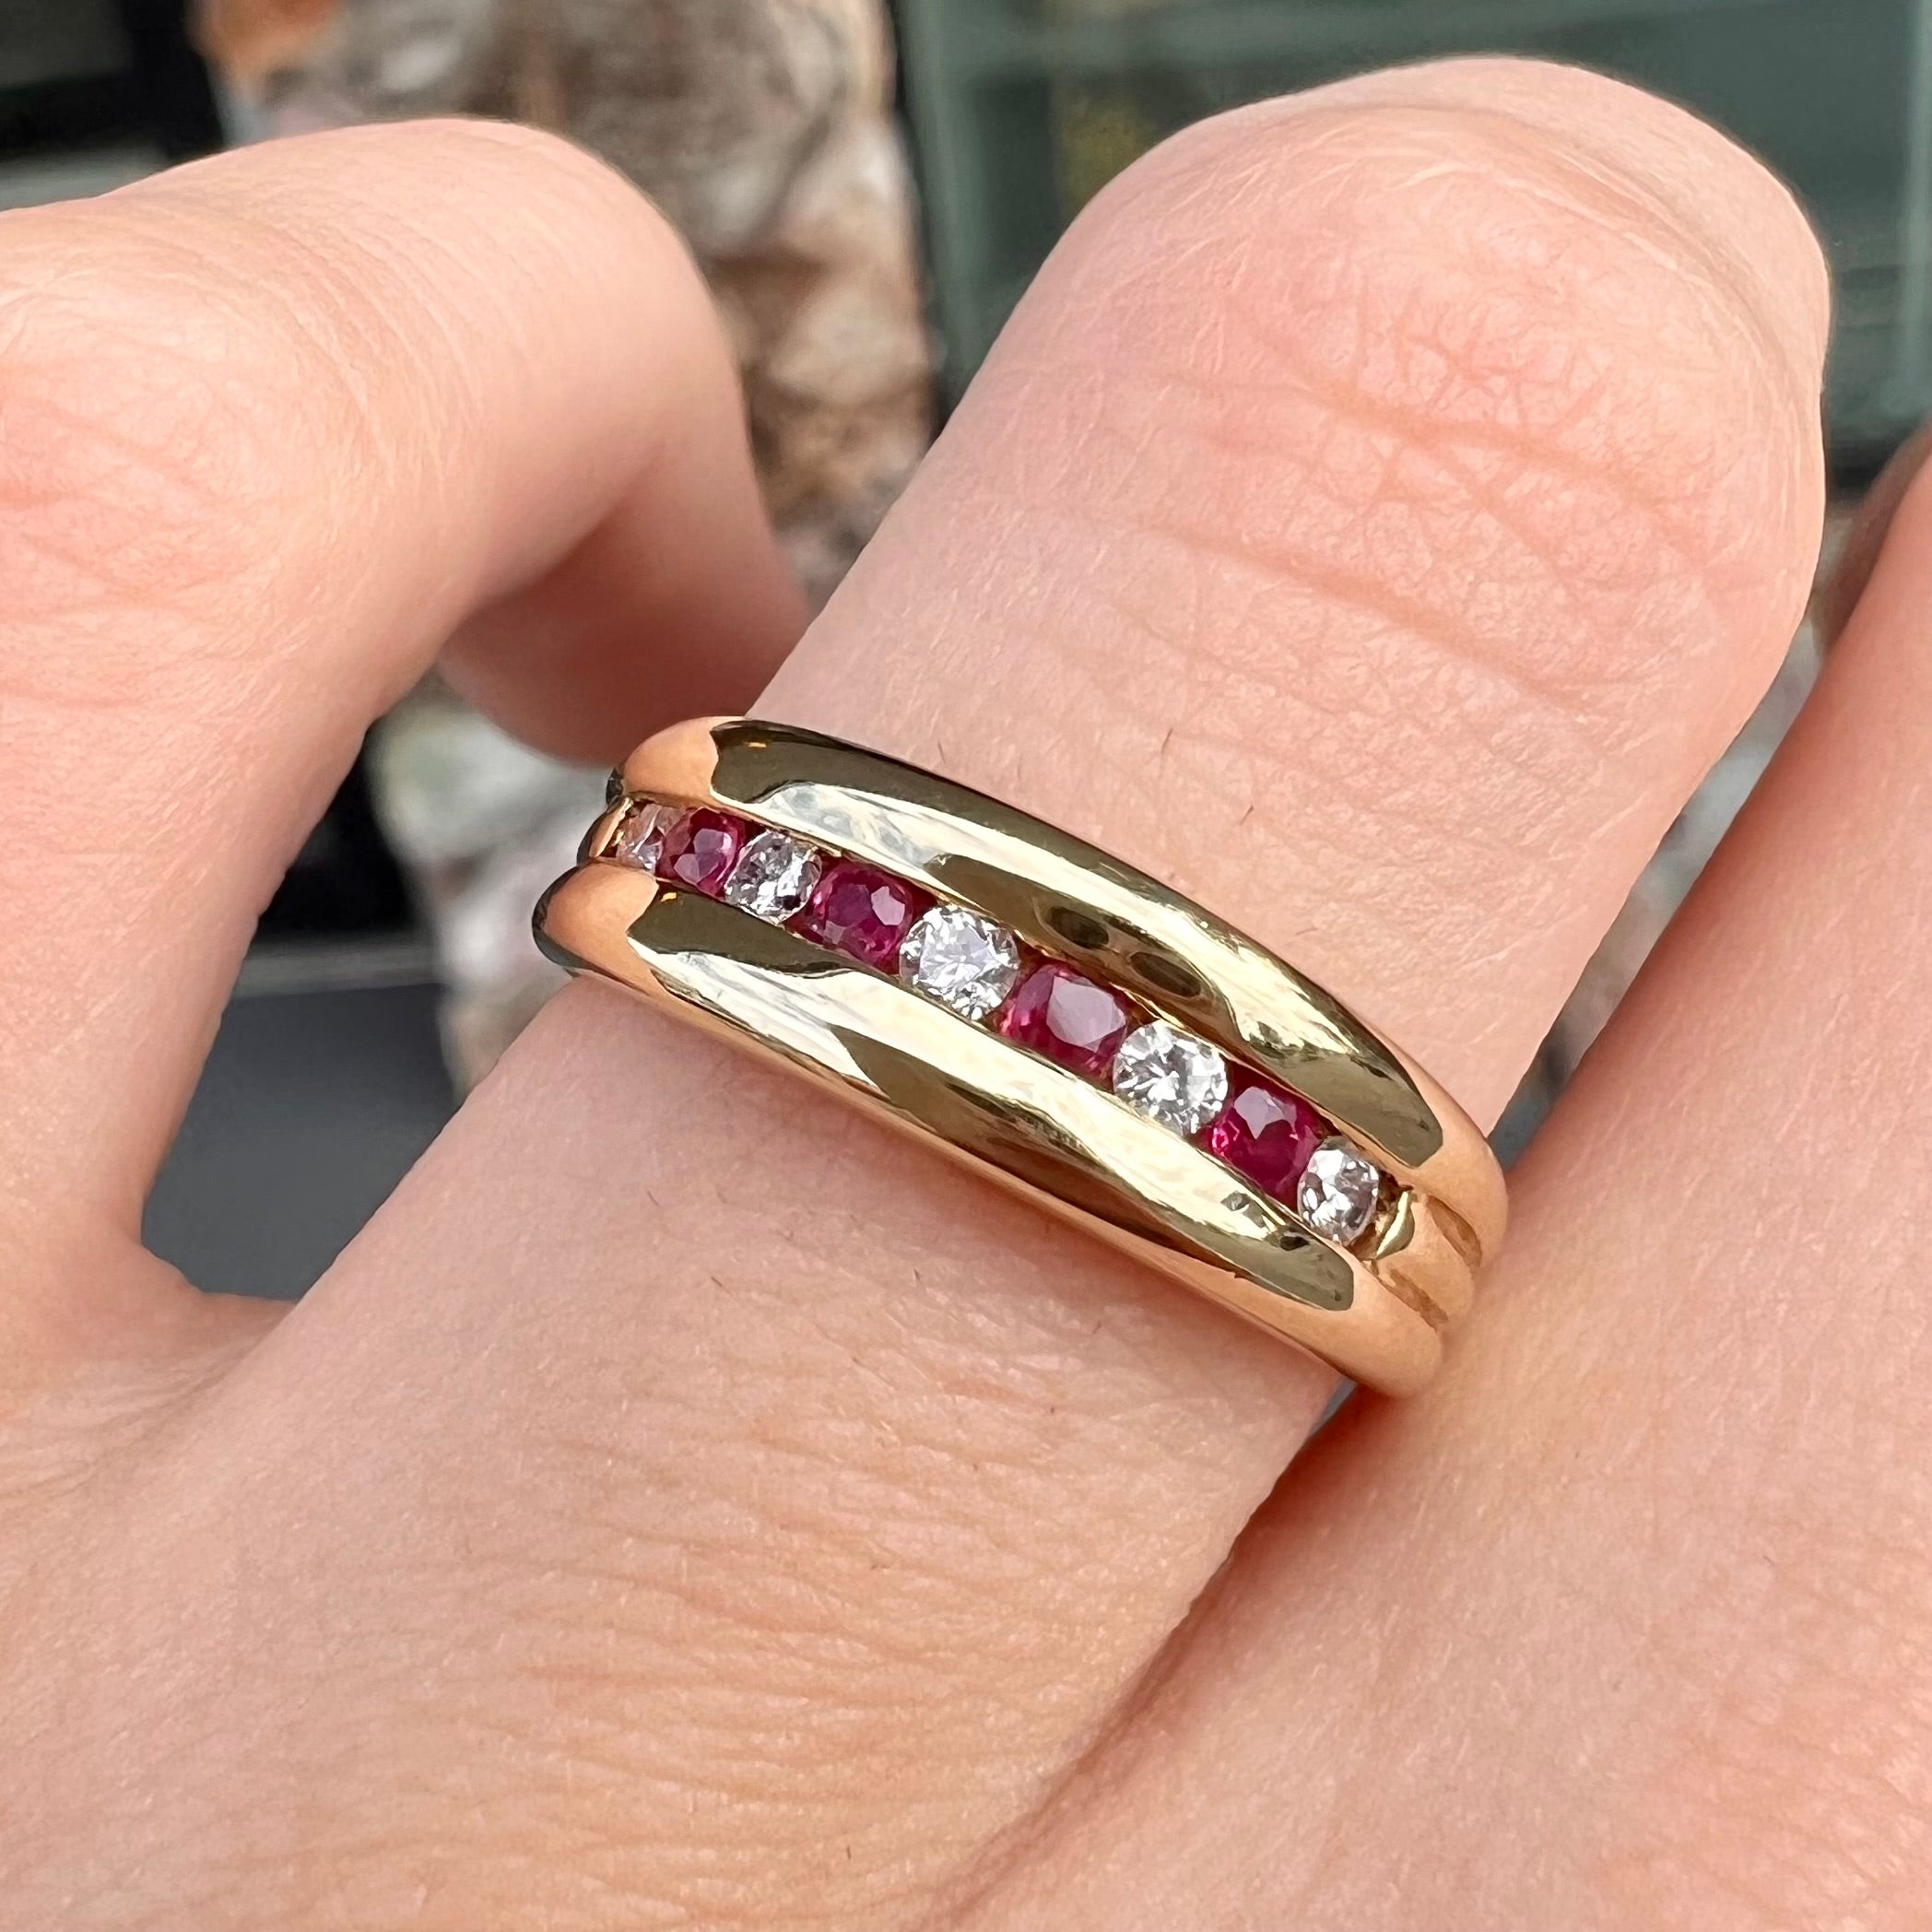 Getting the Best Buy on Your Ruby Diamond Engagement Ring